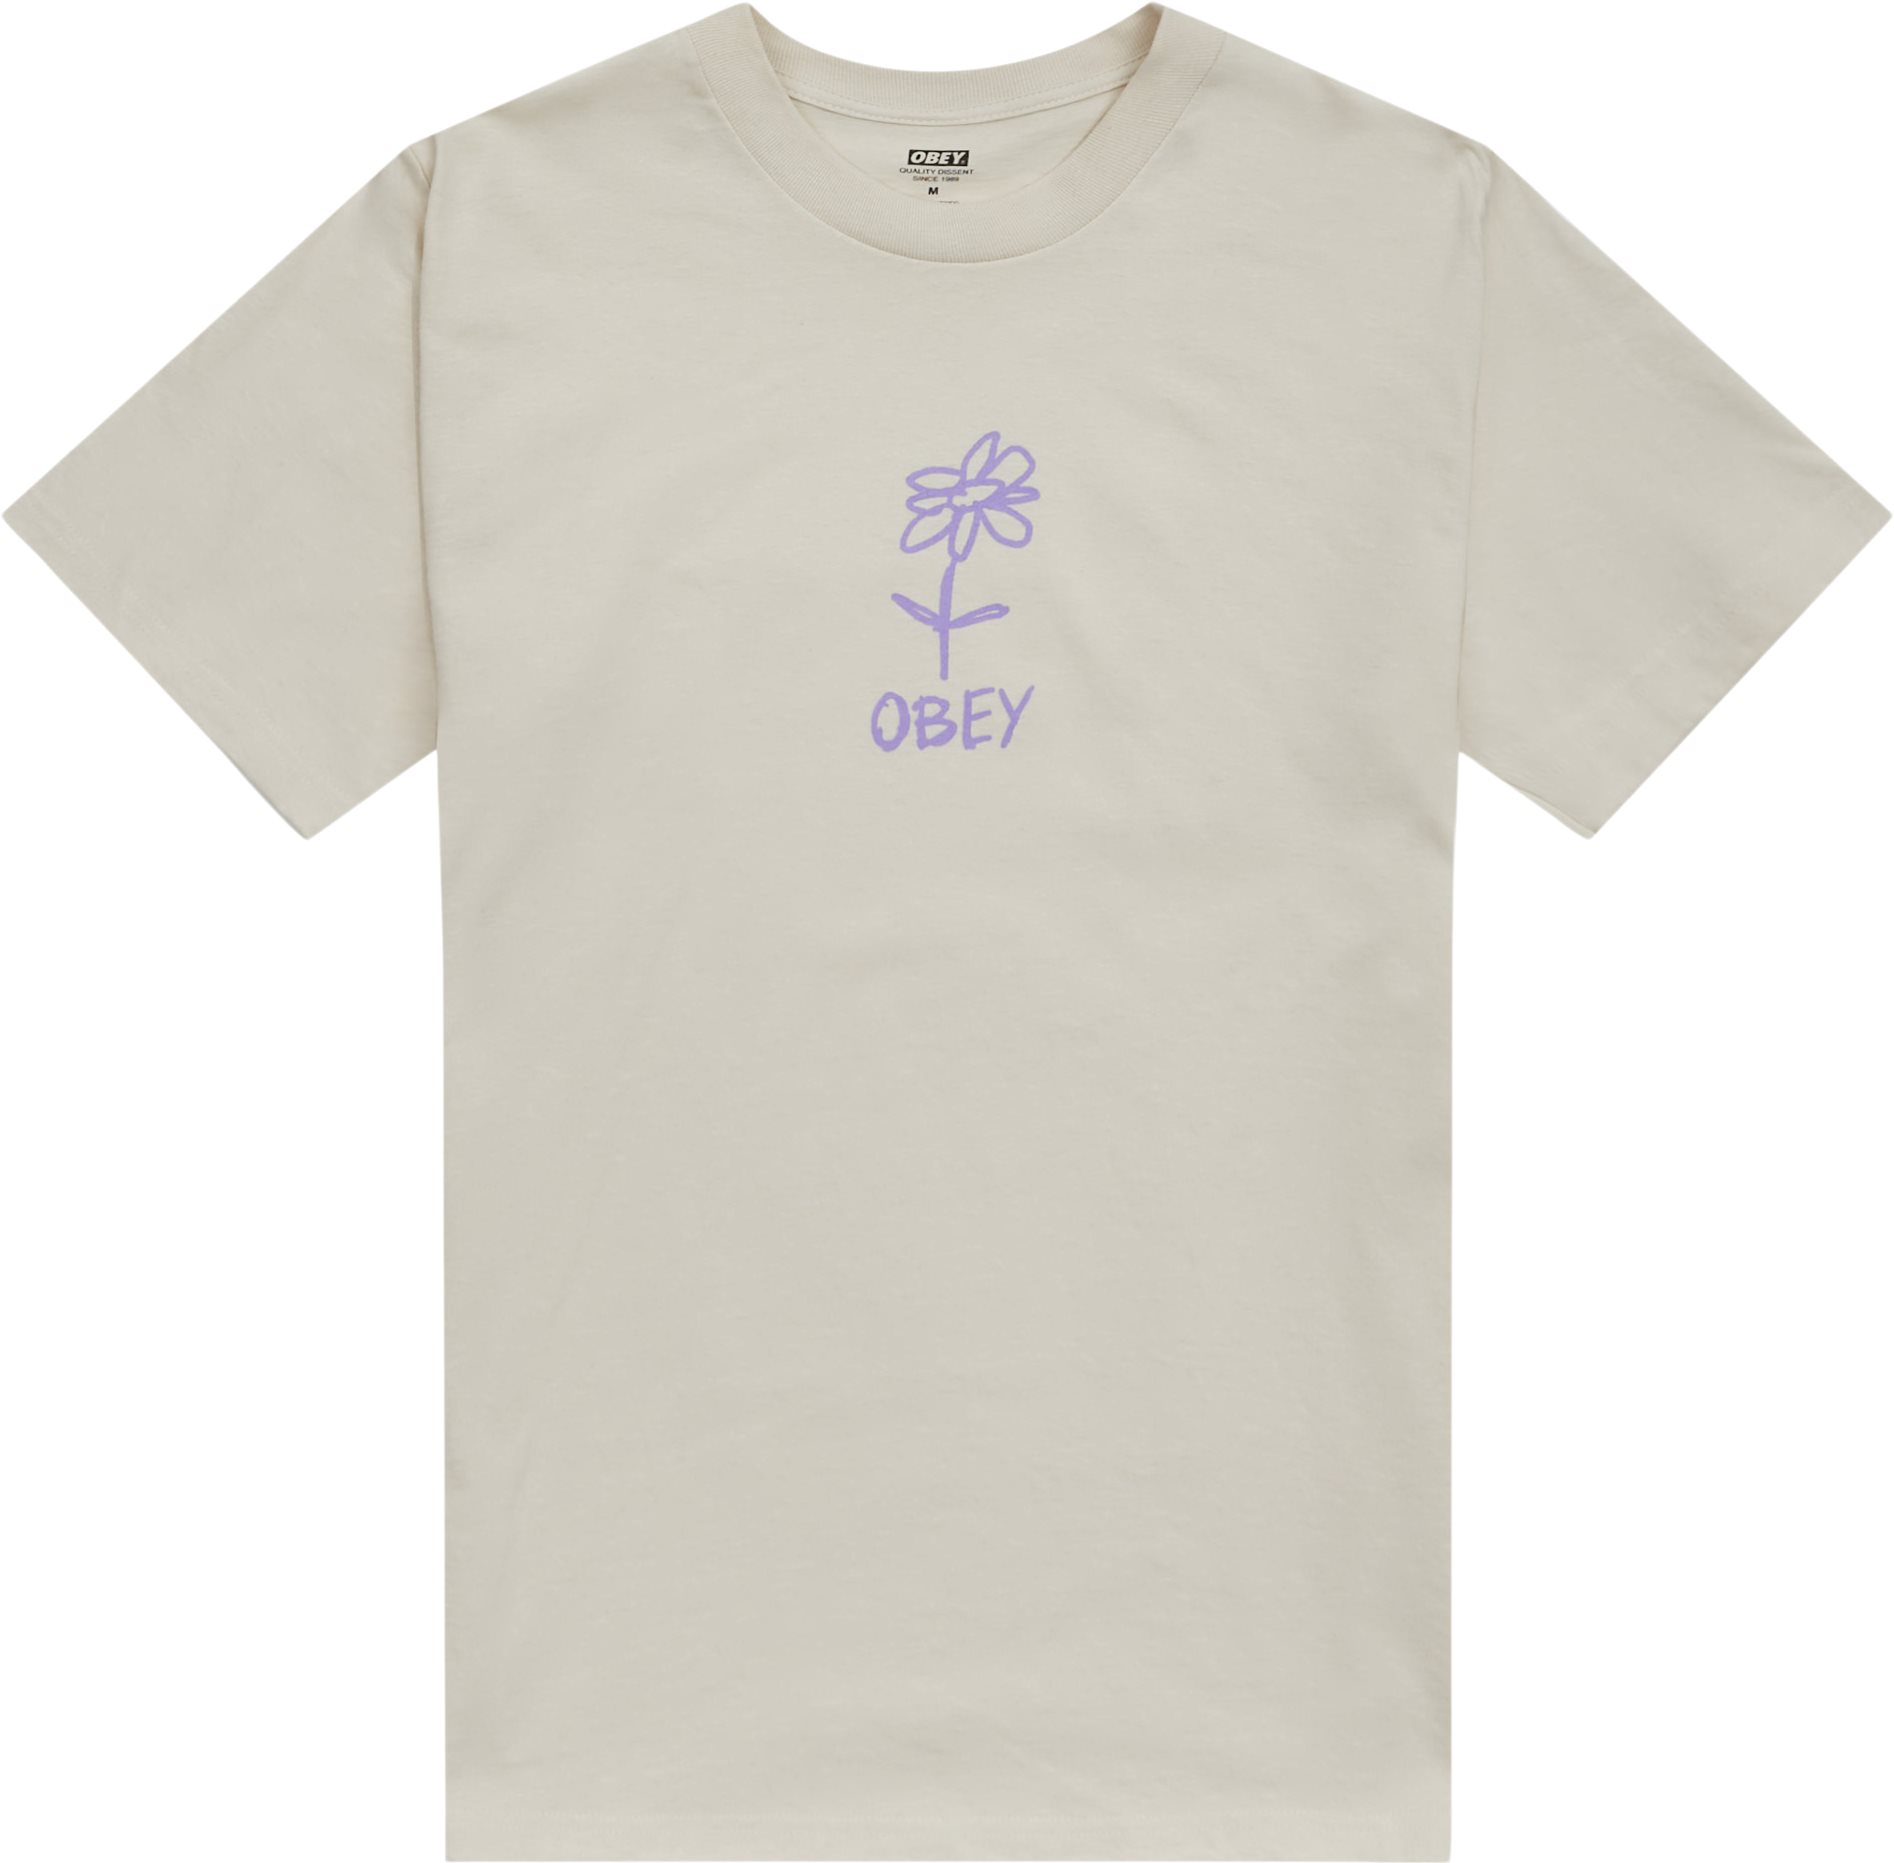 Obey T-shirts OBEY FLOWER DOODLE 165263183 Sand